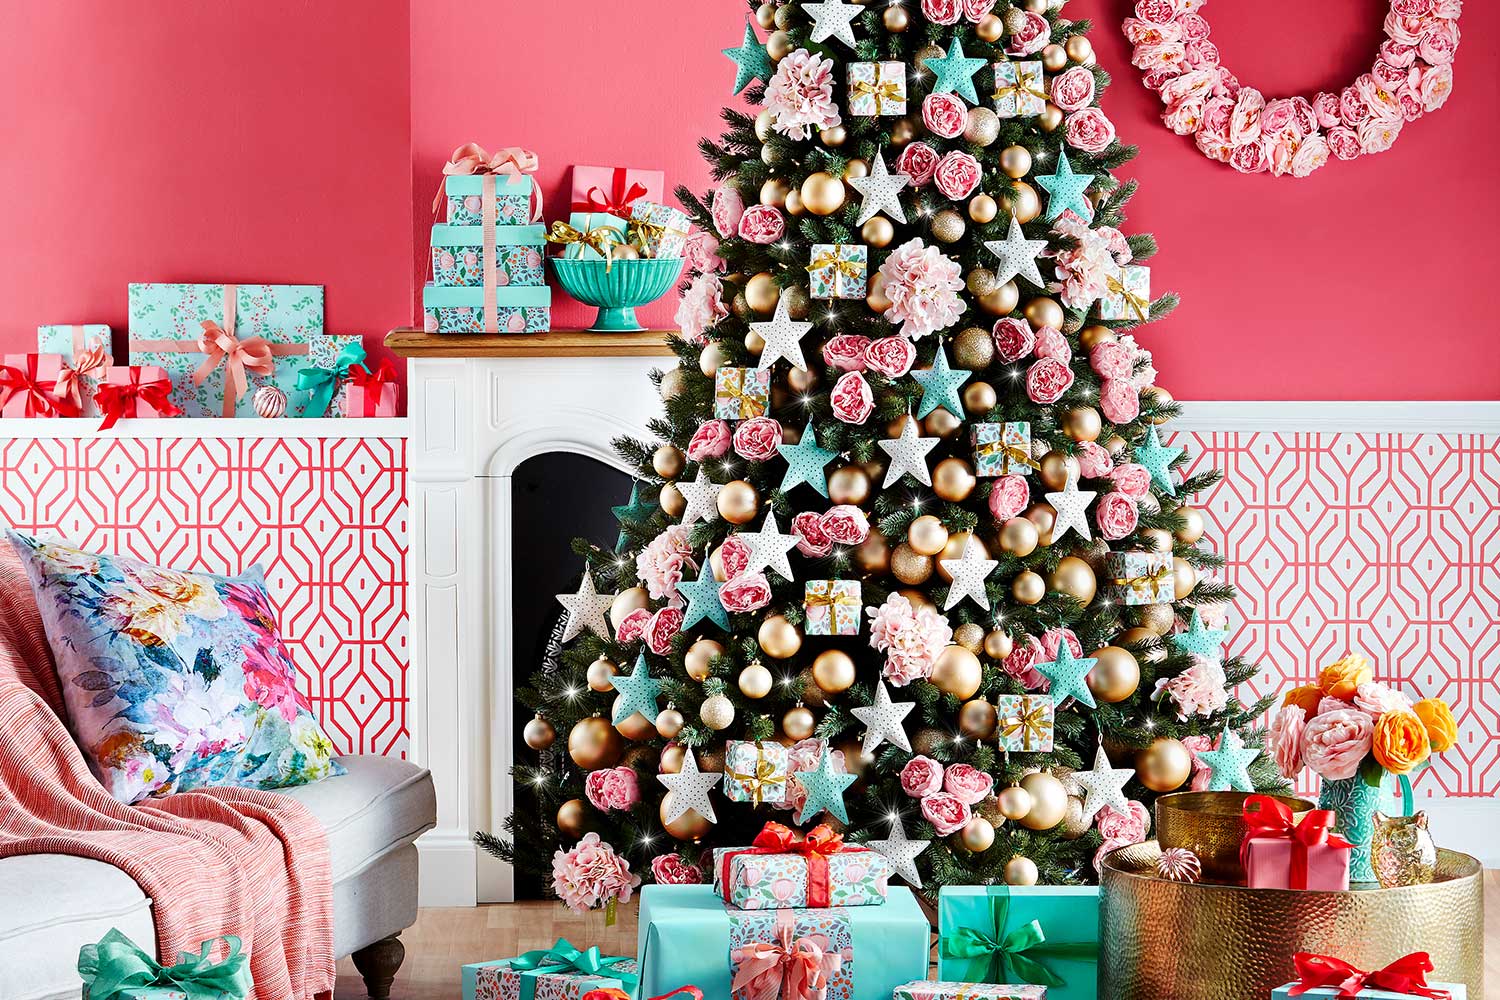 How To Decorate A Stunning Christmas Tree - 5 Easy Steps